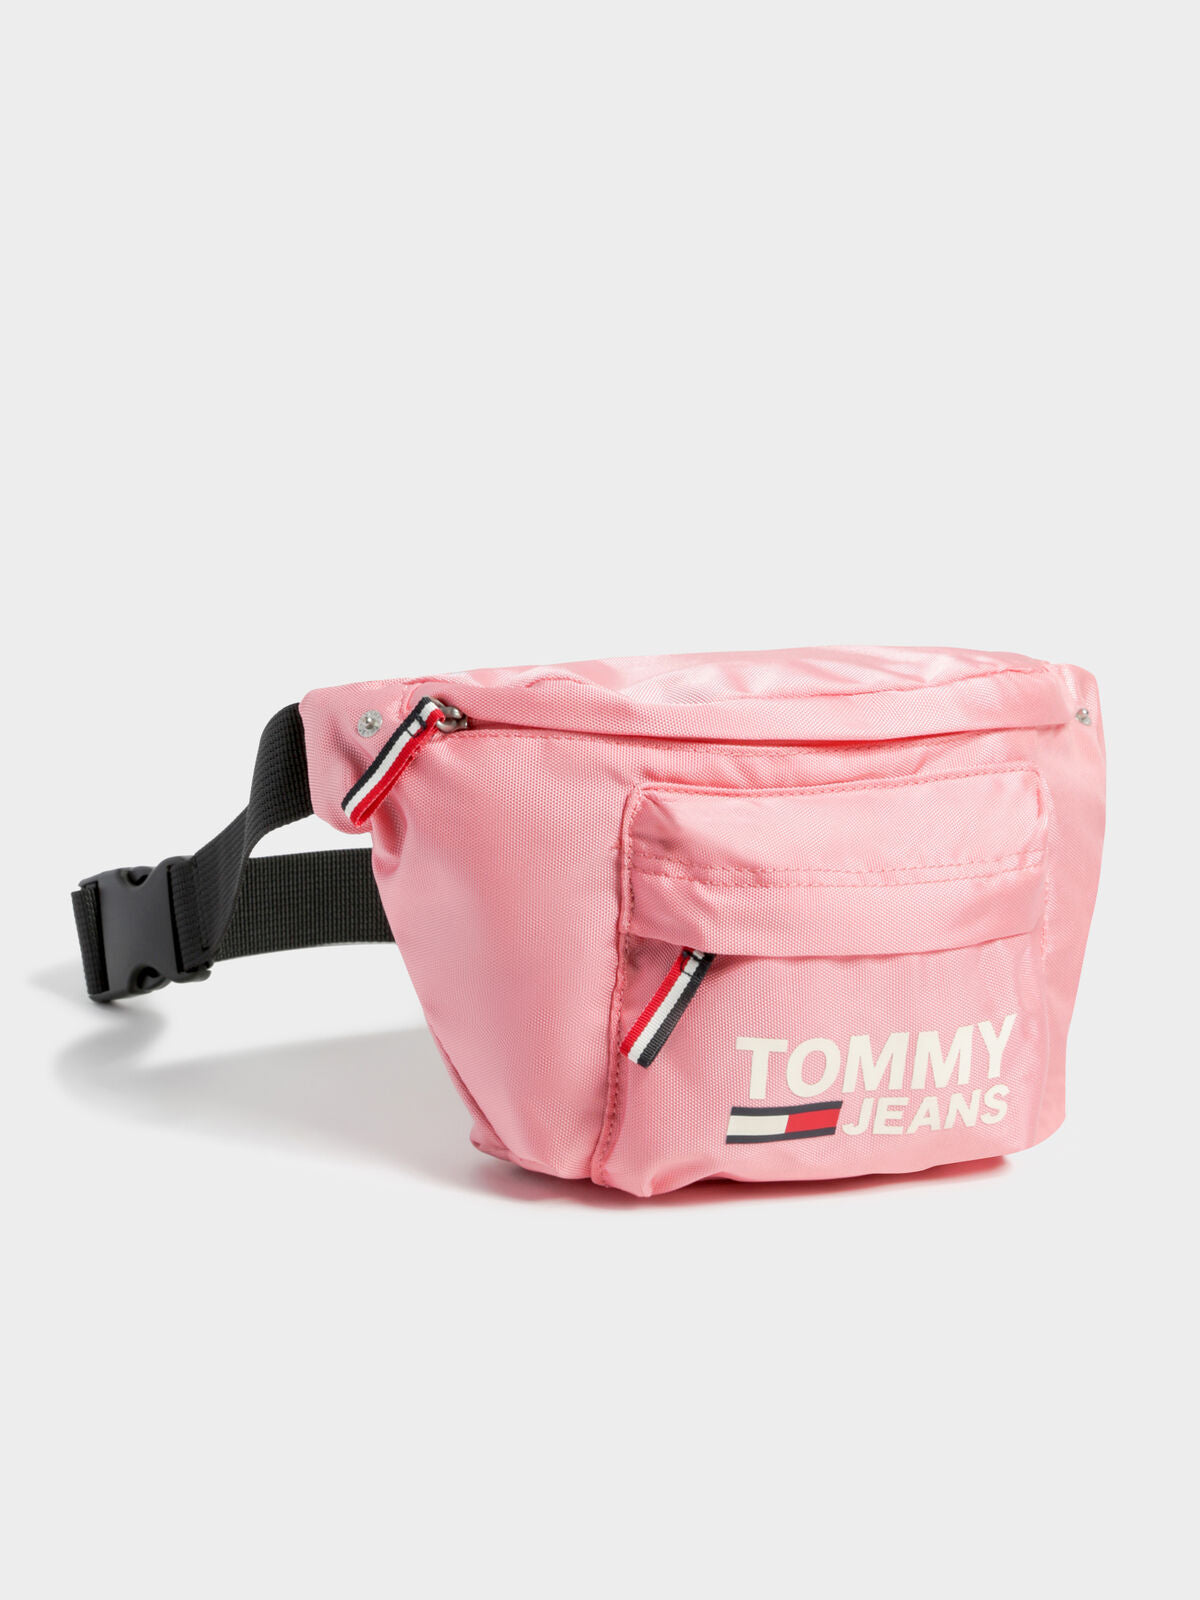 Cool City Bumbag in Pink Icing